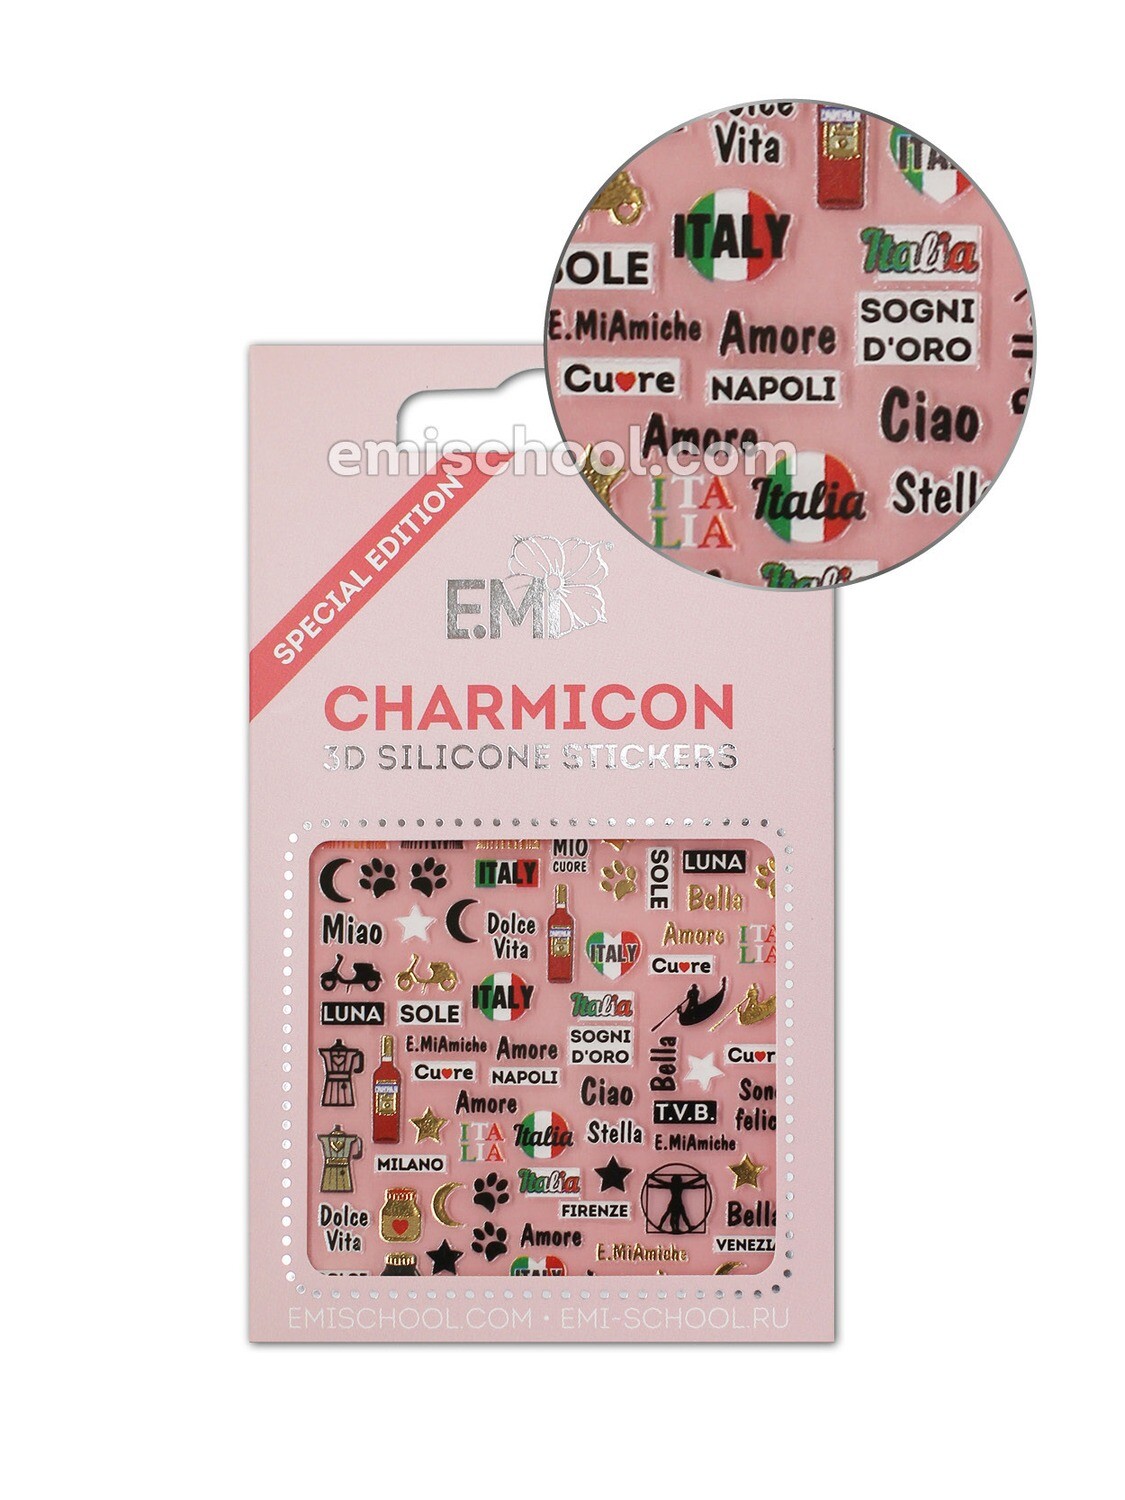 Charmicon 3D Silicone Stickers Italy 1